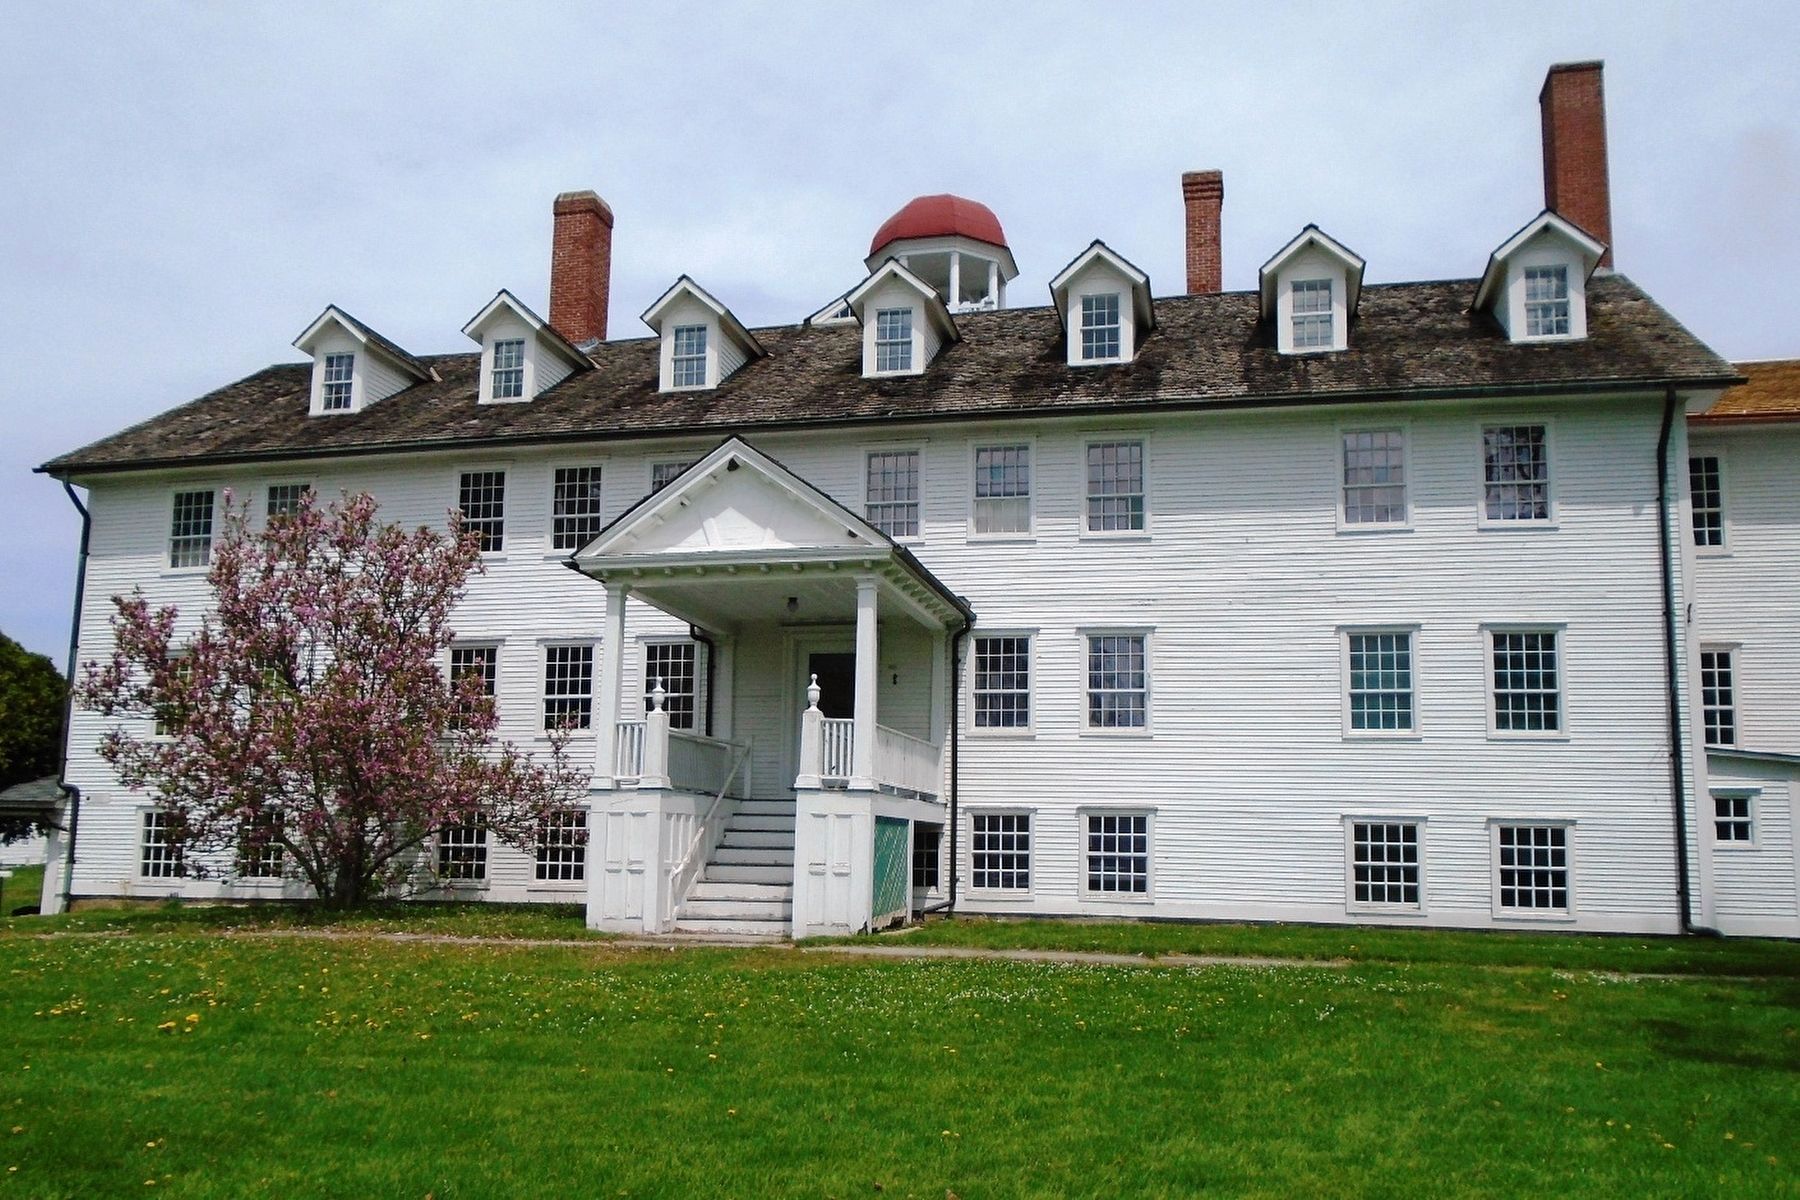 Dwelling House at Canterbury Shaker Village image. Click for full size.